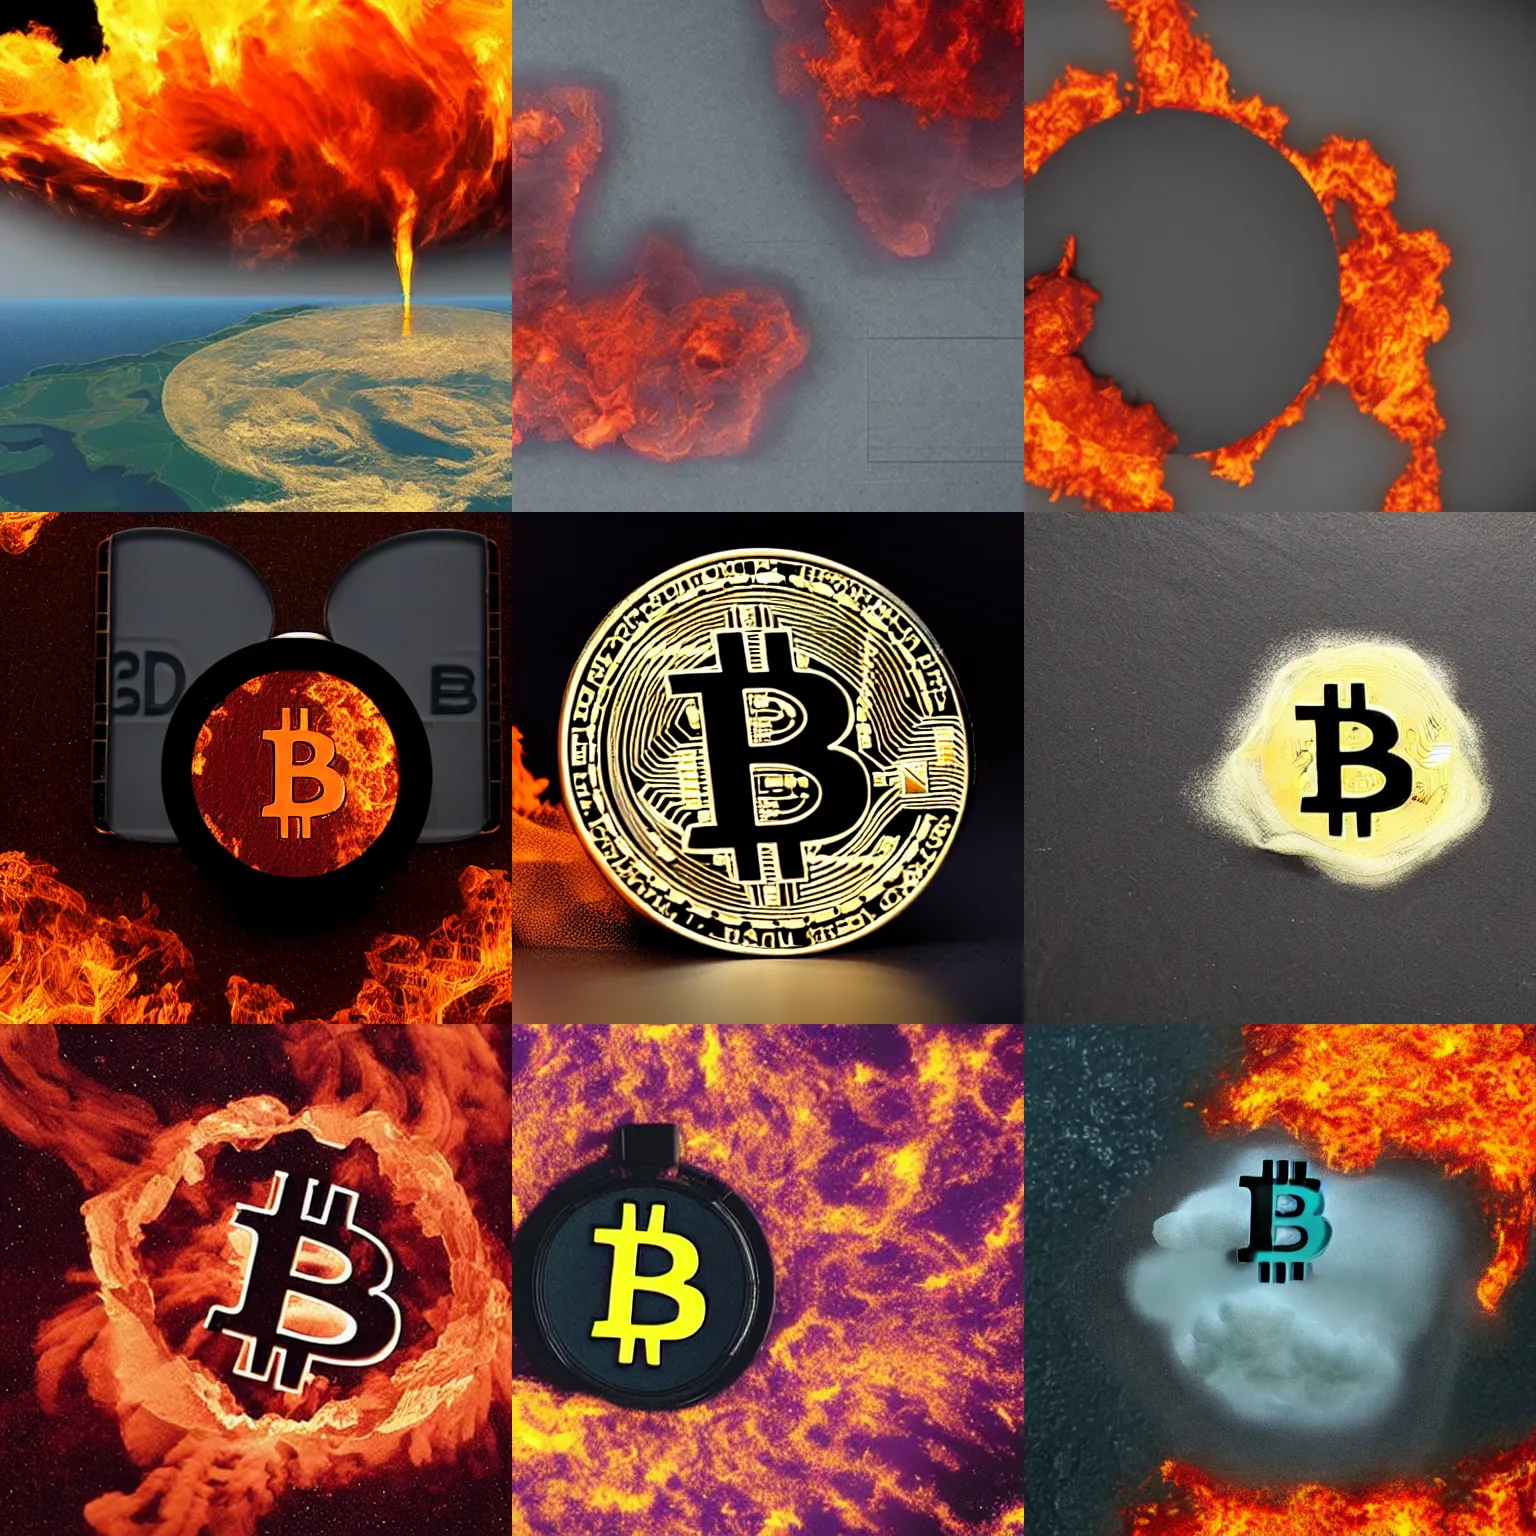 Prompt: < 3 d - film polluted > a think plume of pollution in the shape of bitcoin covers the earth in flames < / 3 d - film >